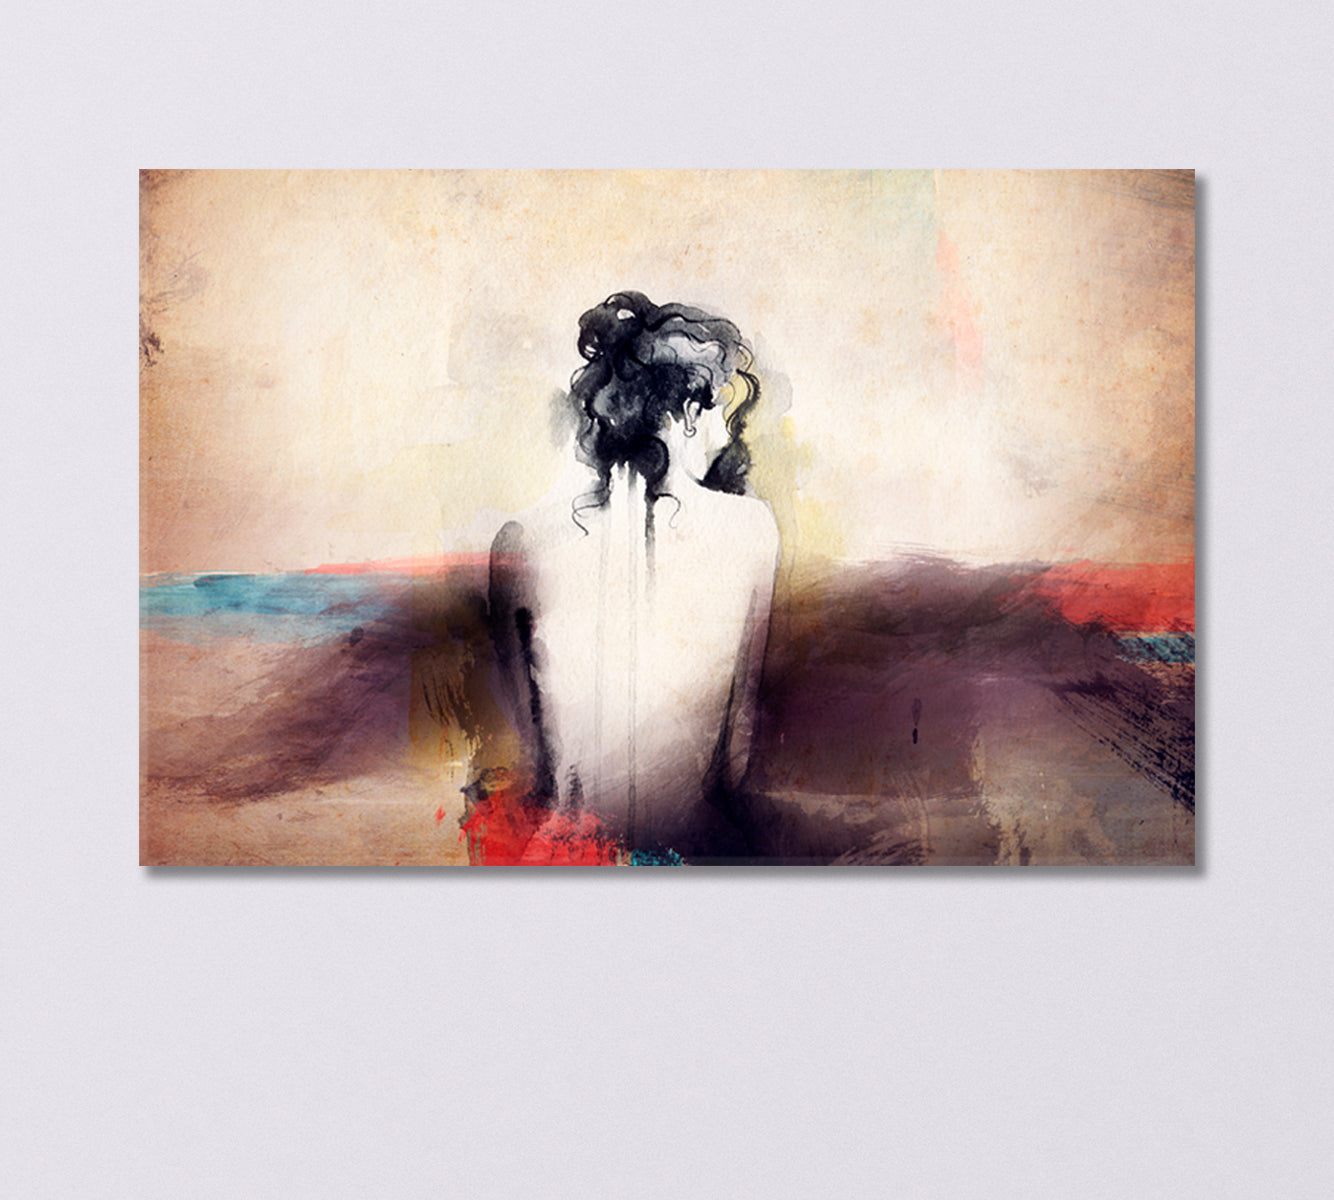 Abstract Woman Body Silhouette Canvas Print-Canvas Print-CetArt-1 Panel-24x16 inches-CetArt